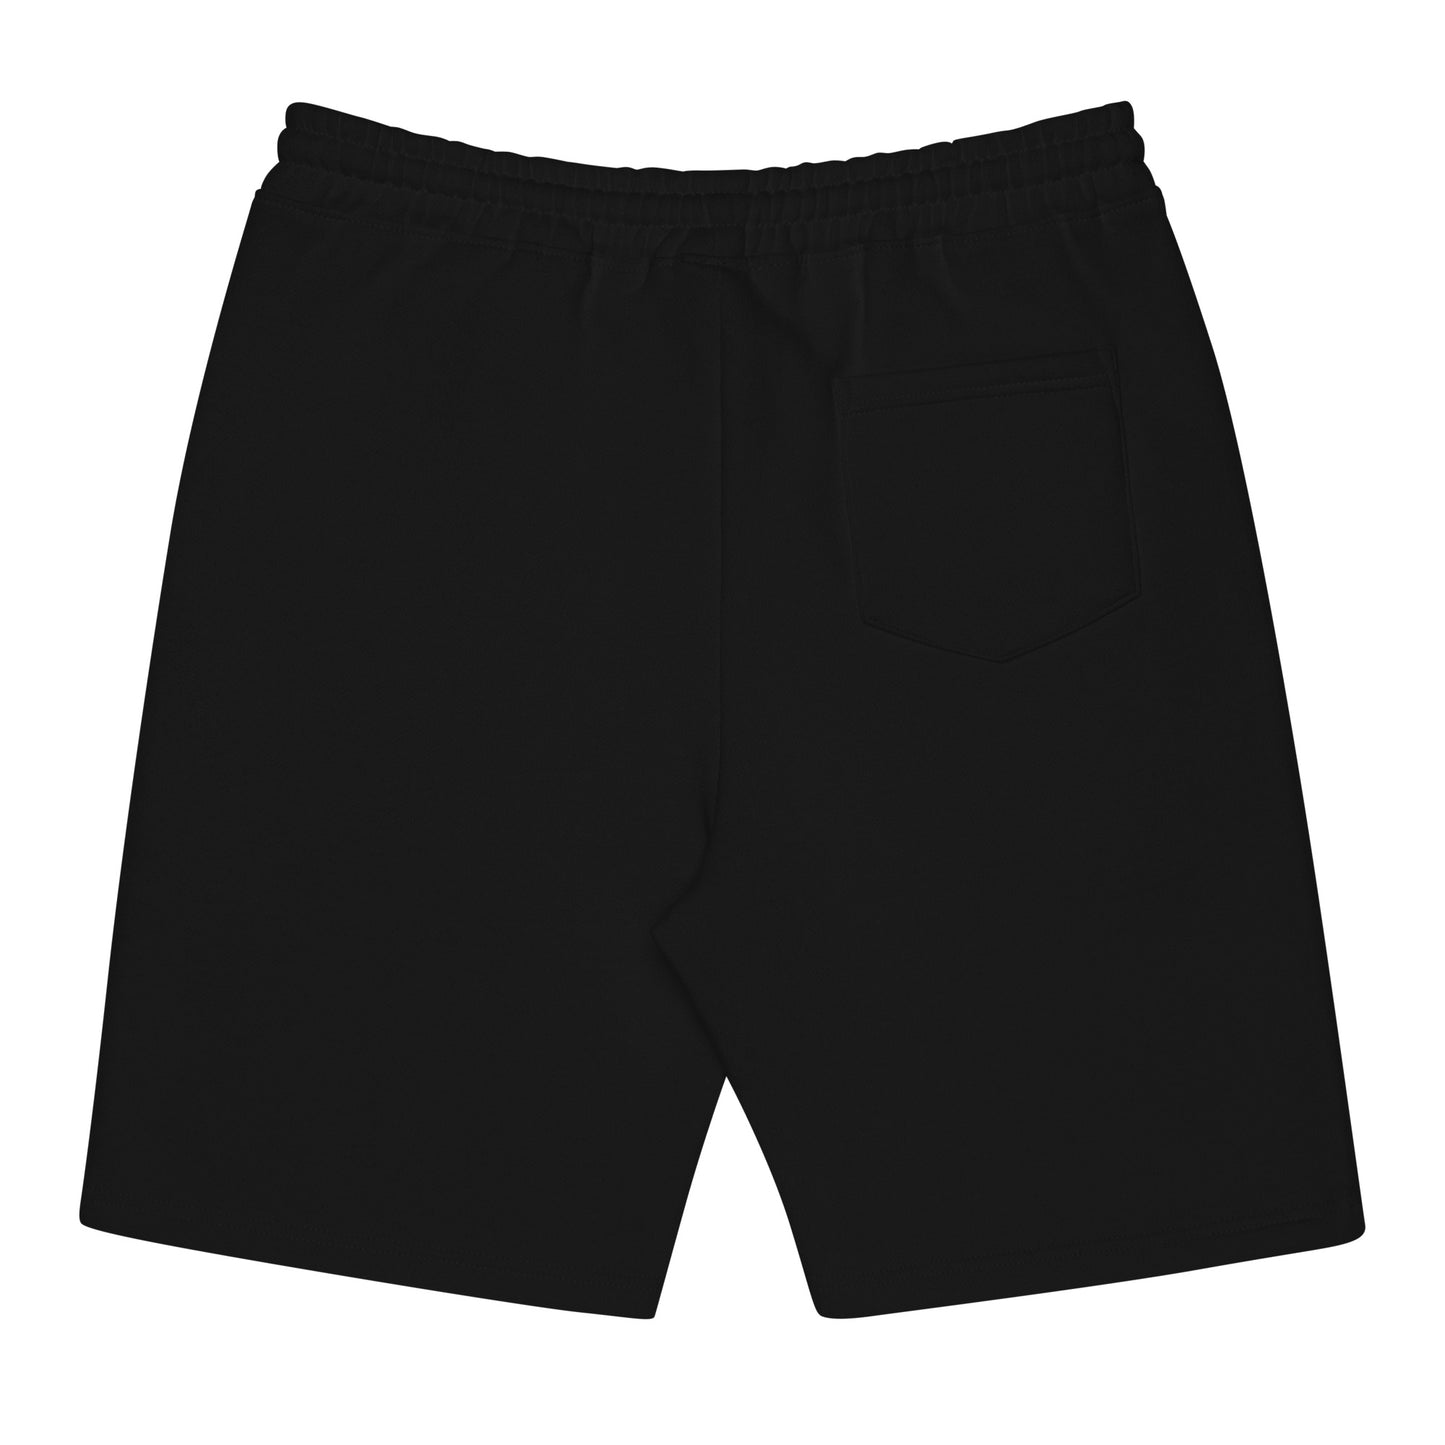 HunnidThings Essential Shorts